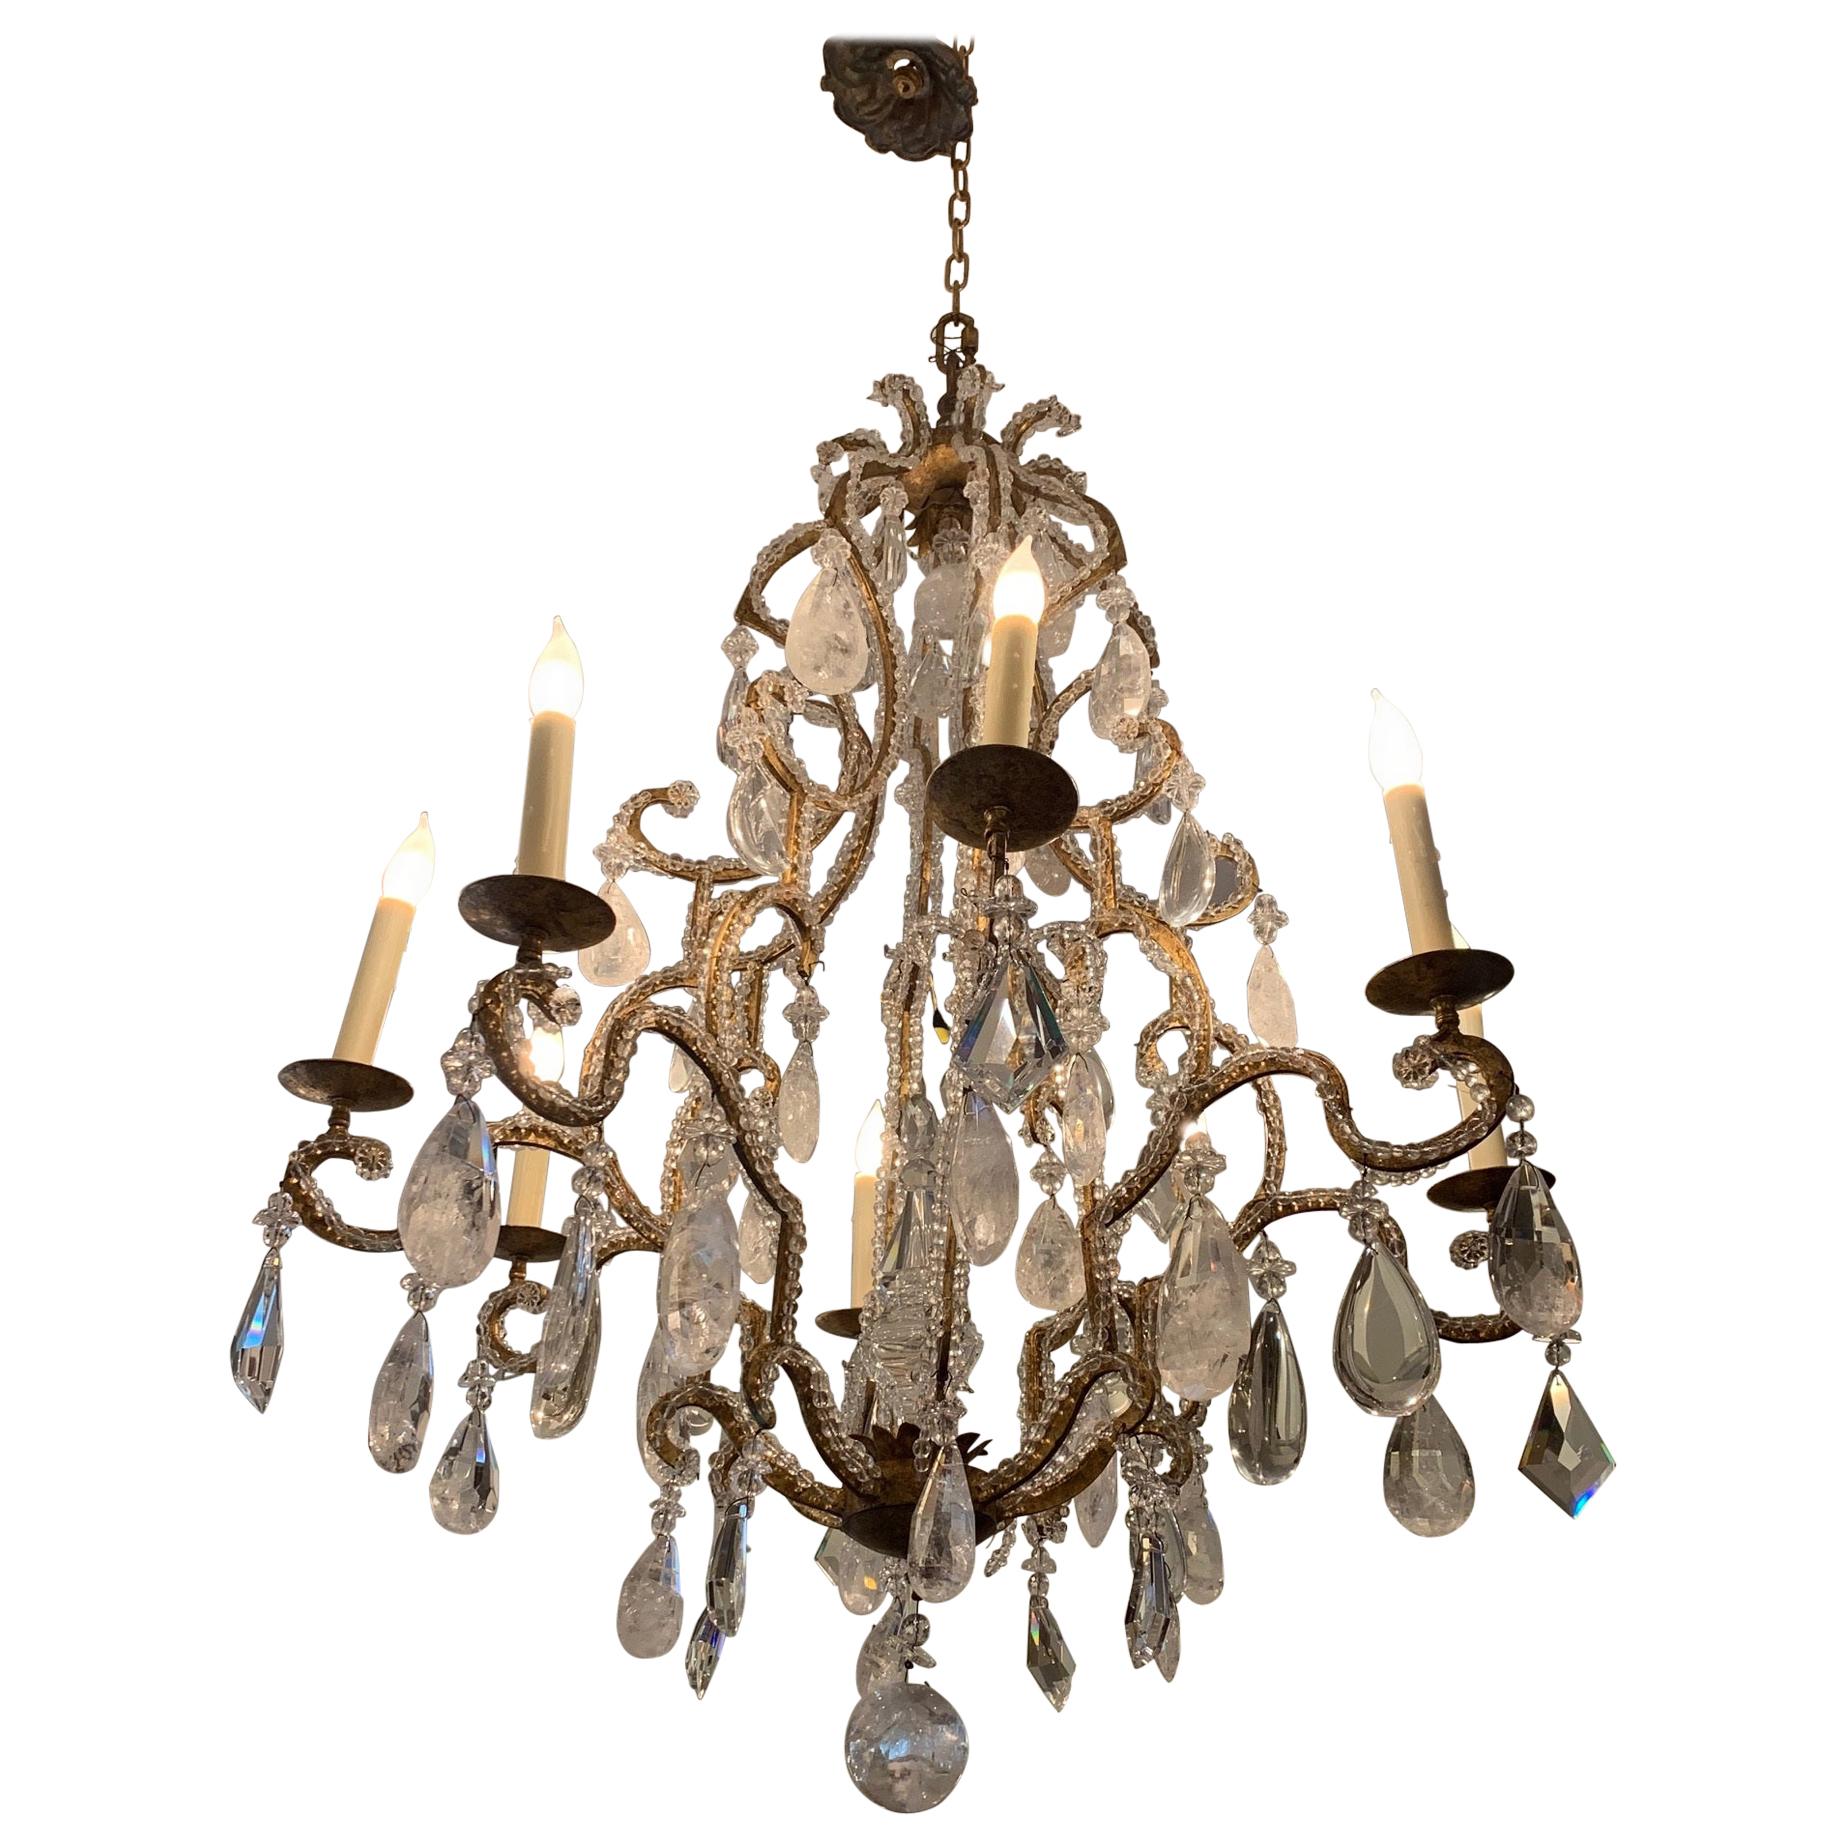 Monumental Large Super Glitzy Statement Chandelier with Rock Crystals